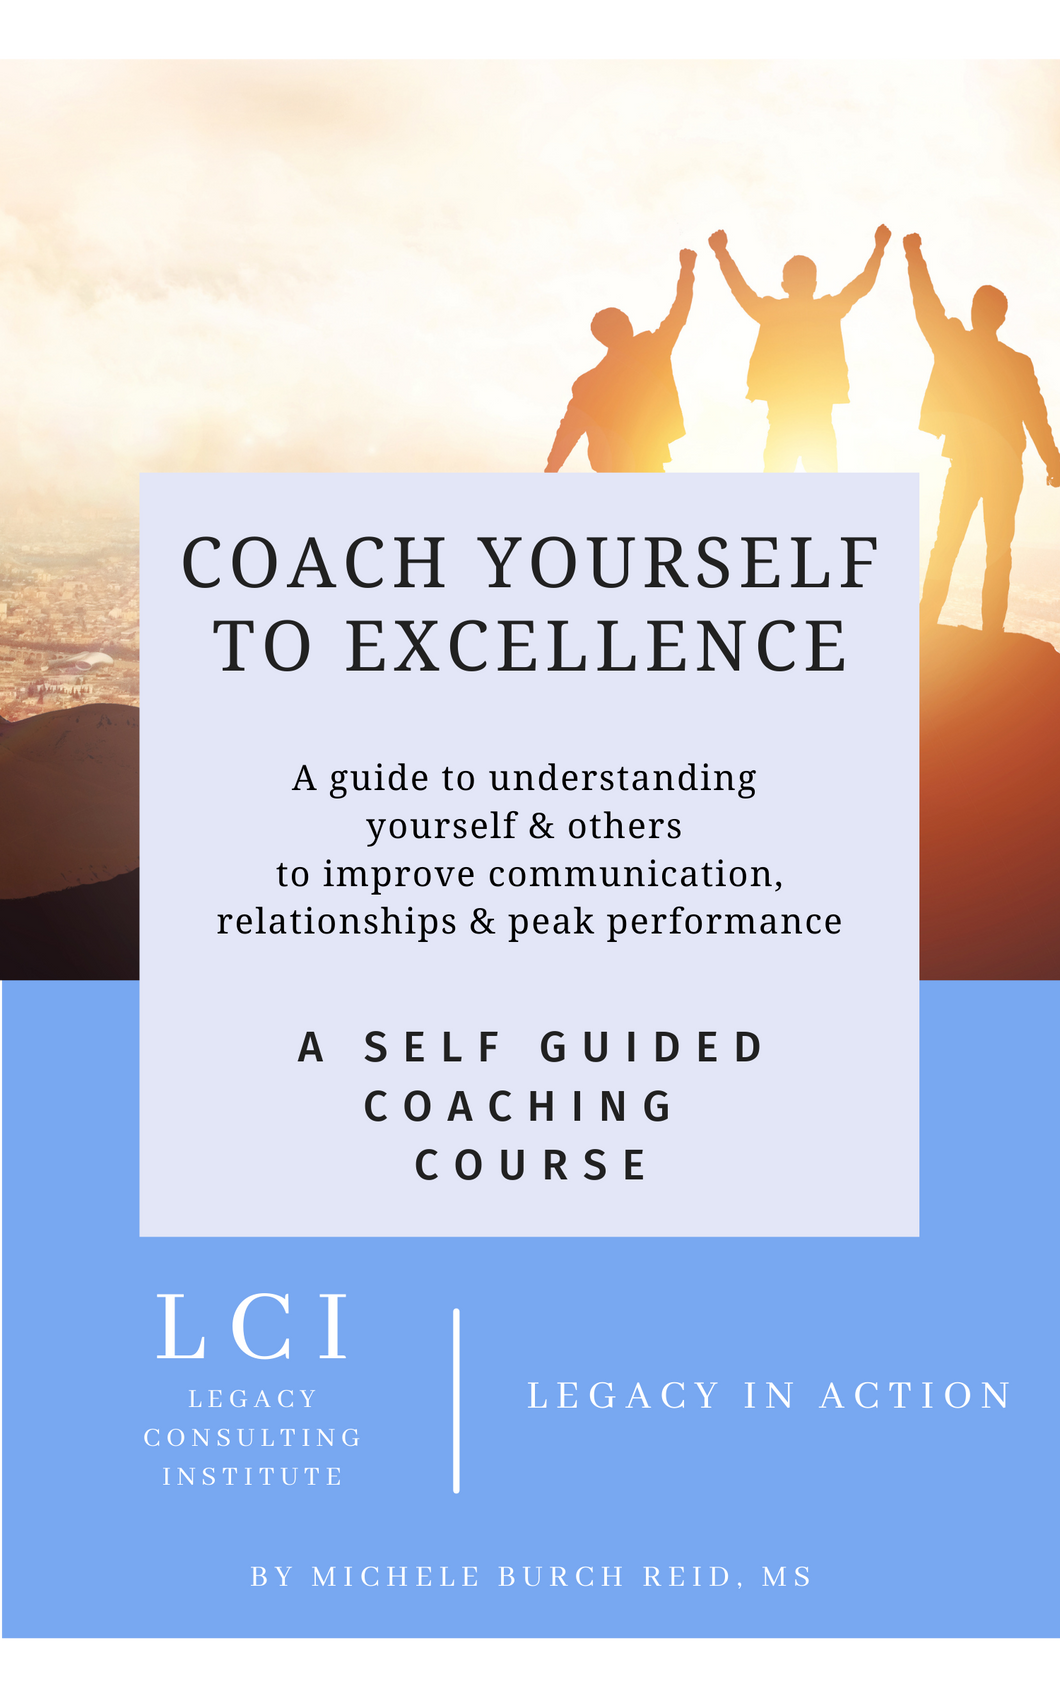 Module 1 of Coach Yourself to Excellence ebook